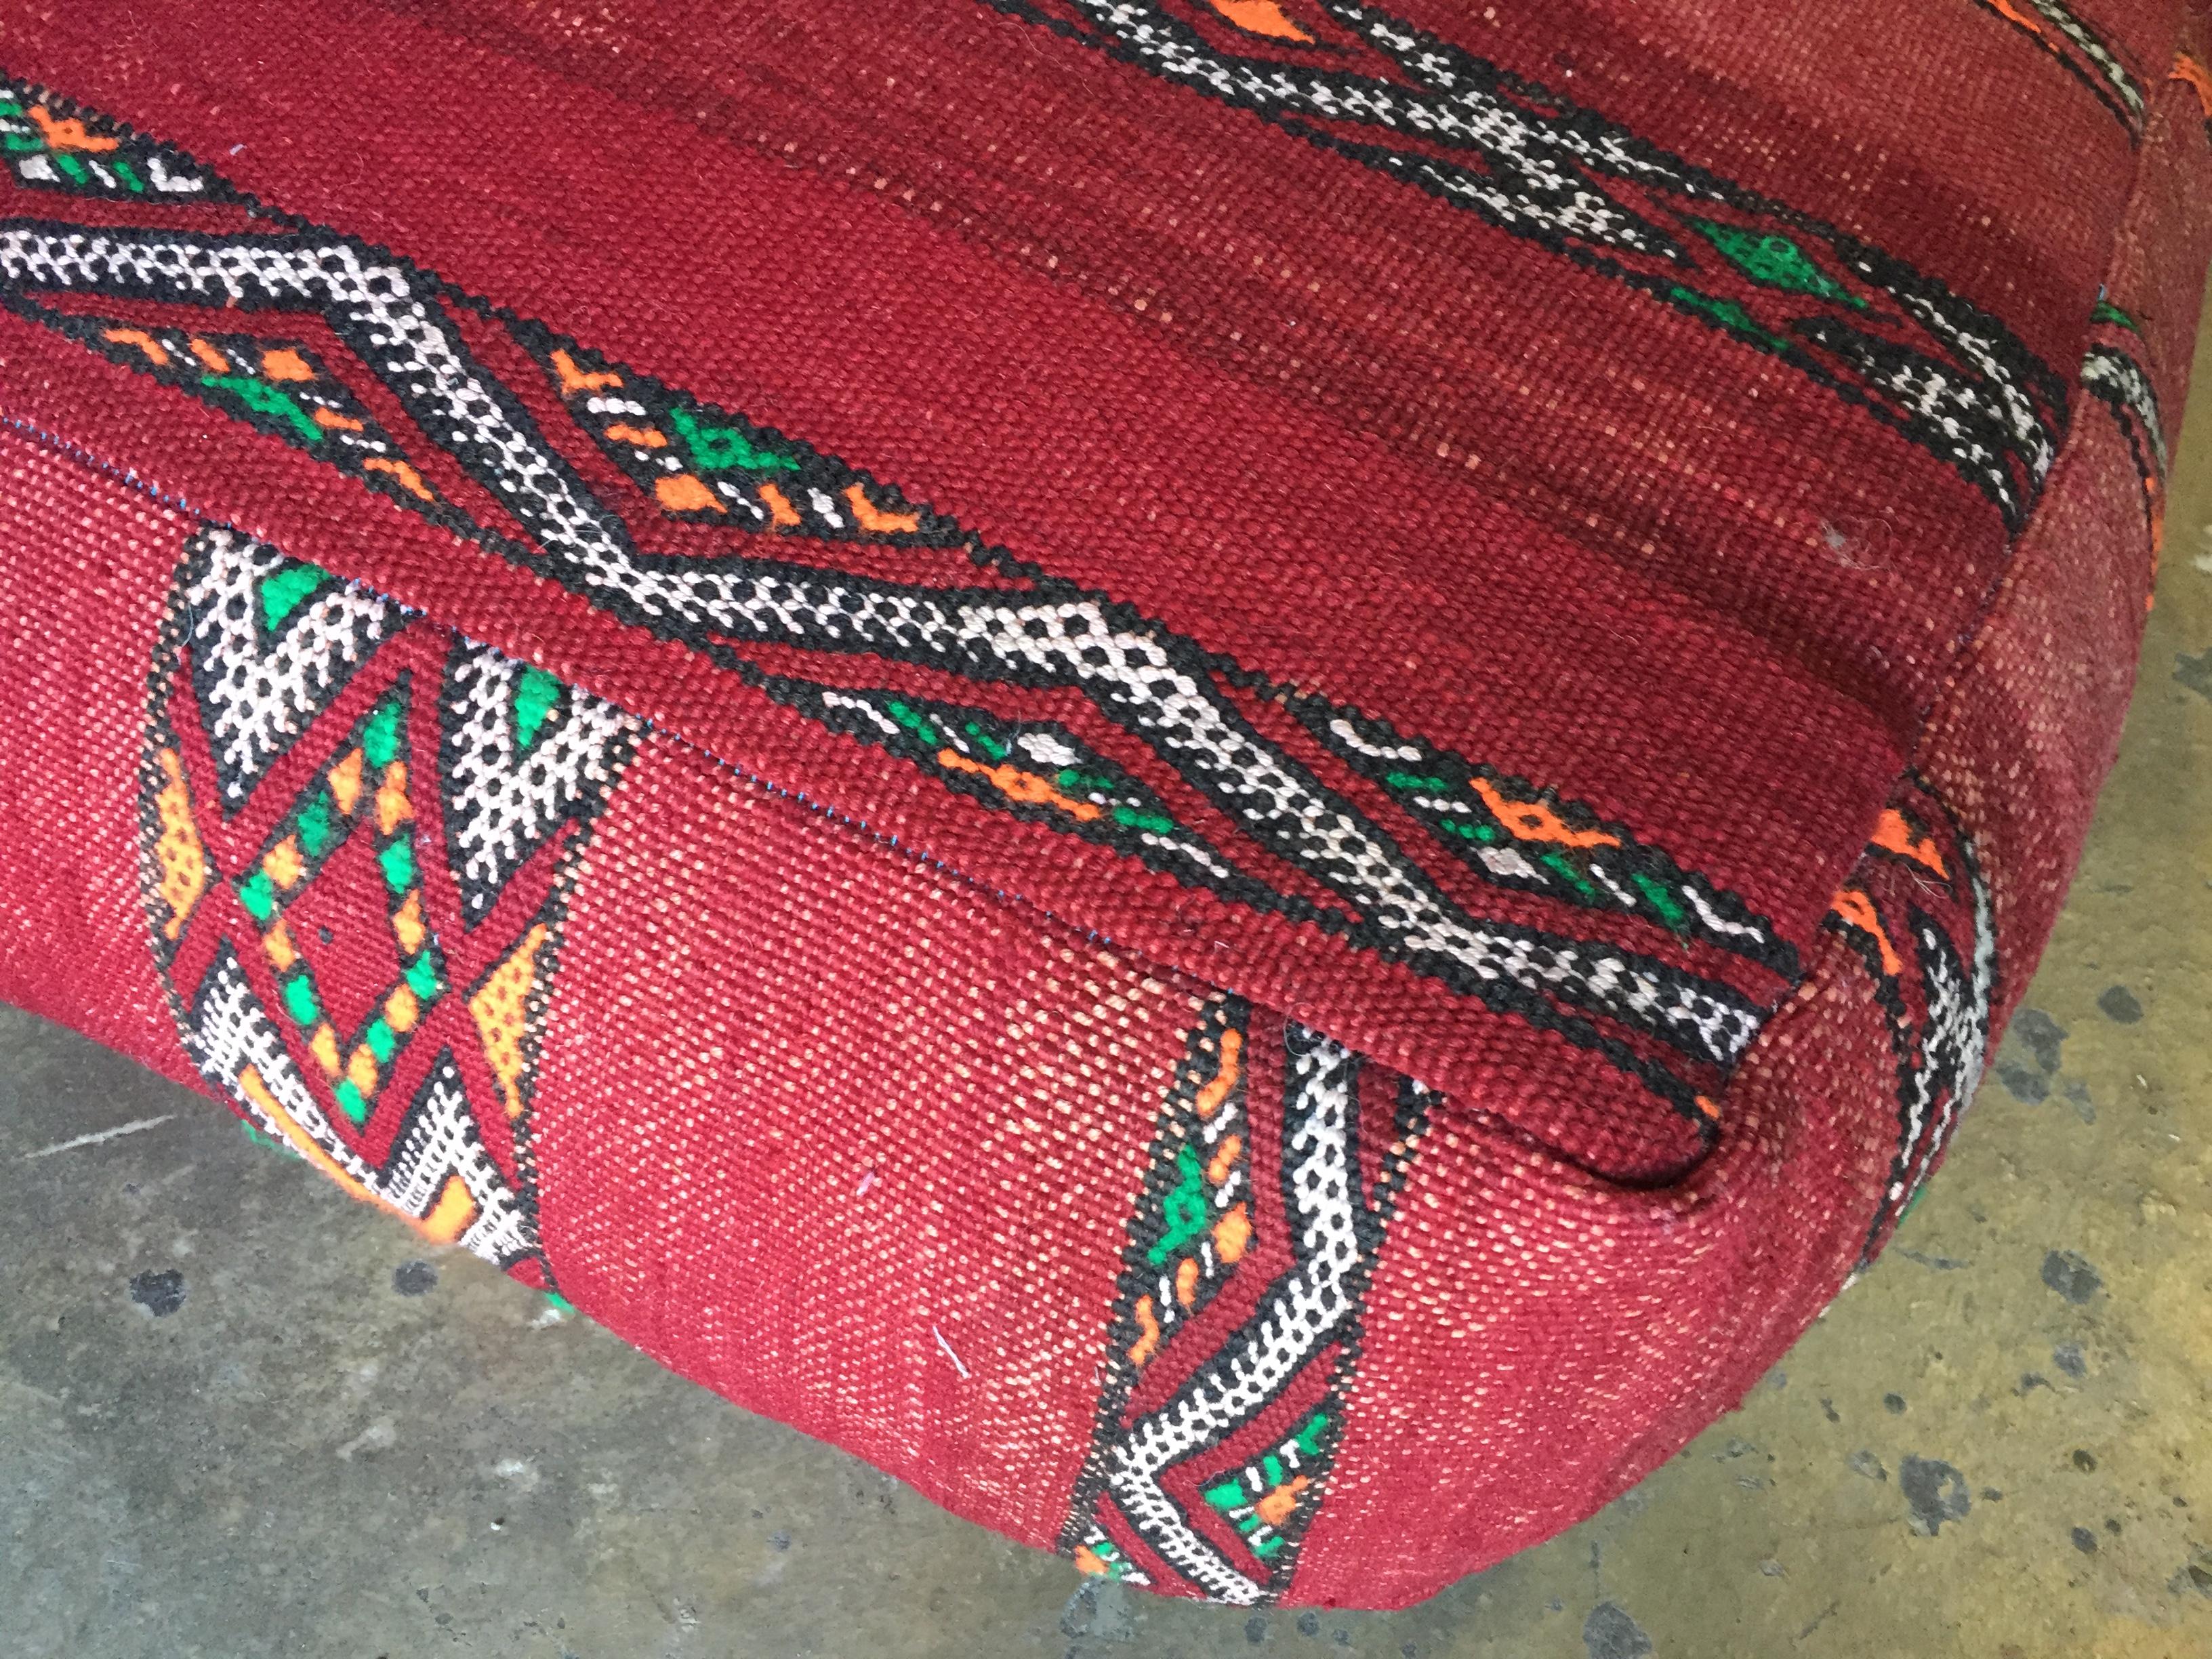 Hand-Woven Moroccan Floor Pillow Seat Cushion Made from a Vintage Tribal Berber Rug